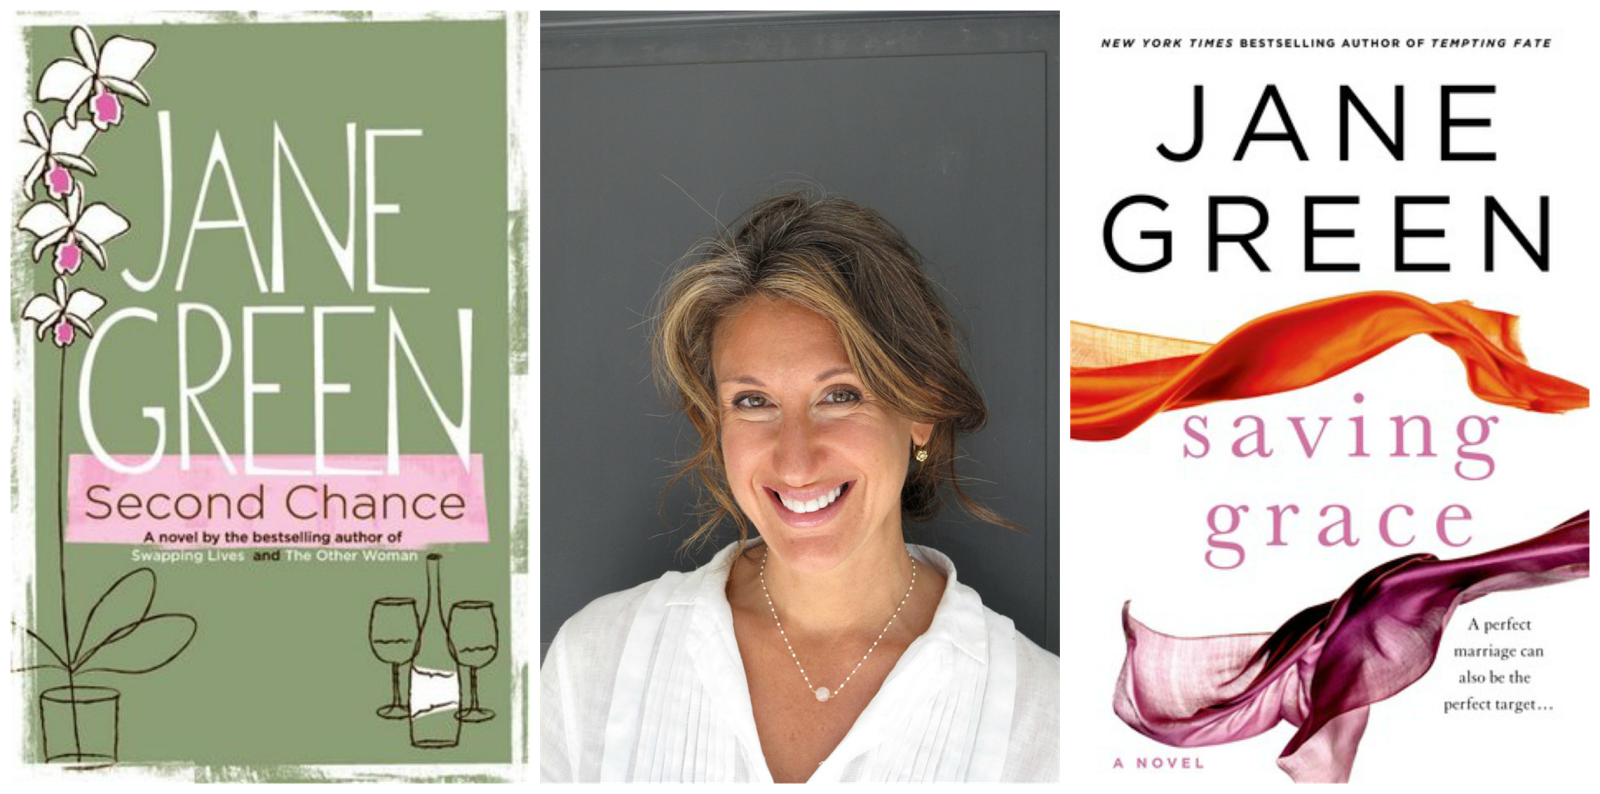 Fuelled by Fiction: Authors to Try if You Like Jodi Picoult